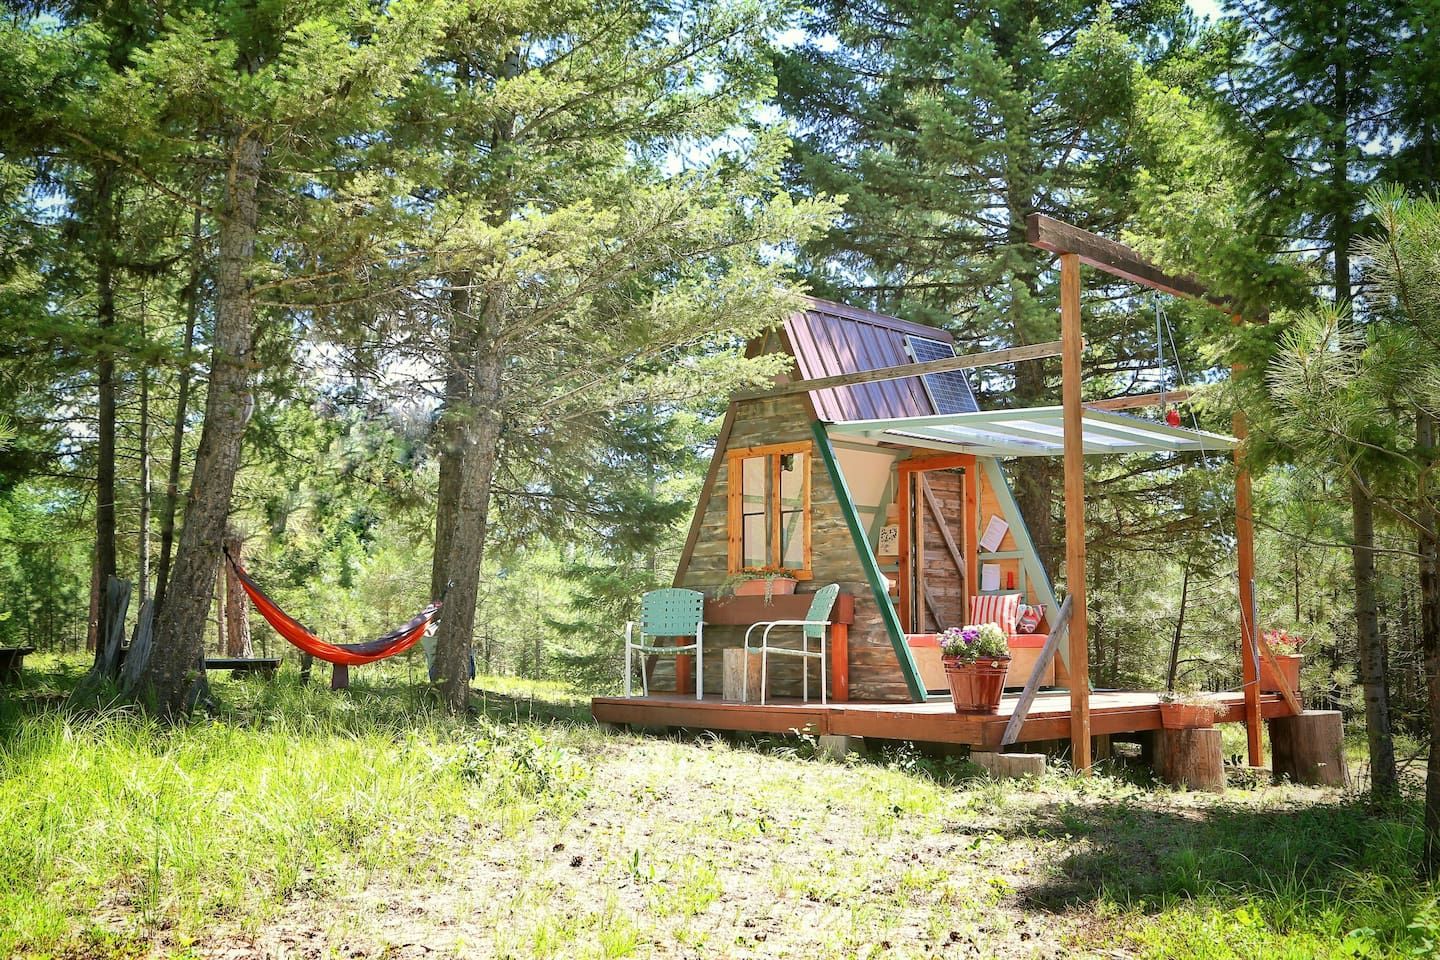 Transient Dislocation Ligation Cheap Tiny House: This Tiny A-Frame Cabin Cost Just $700